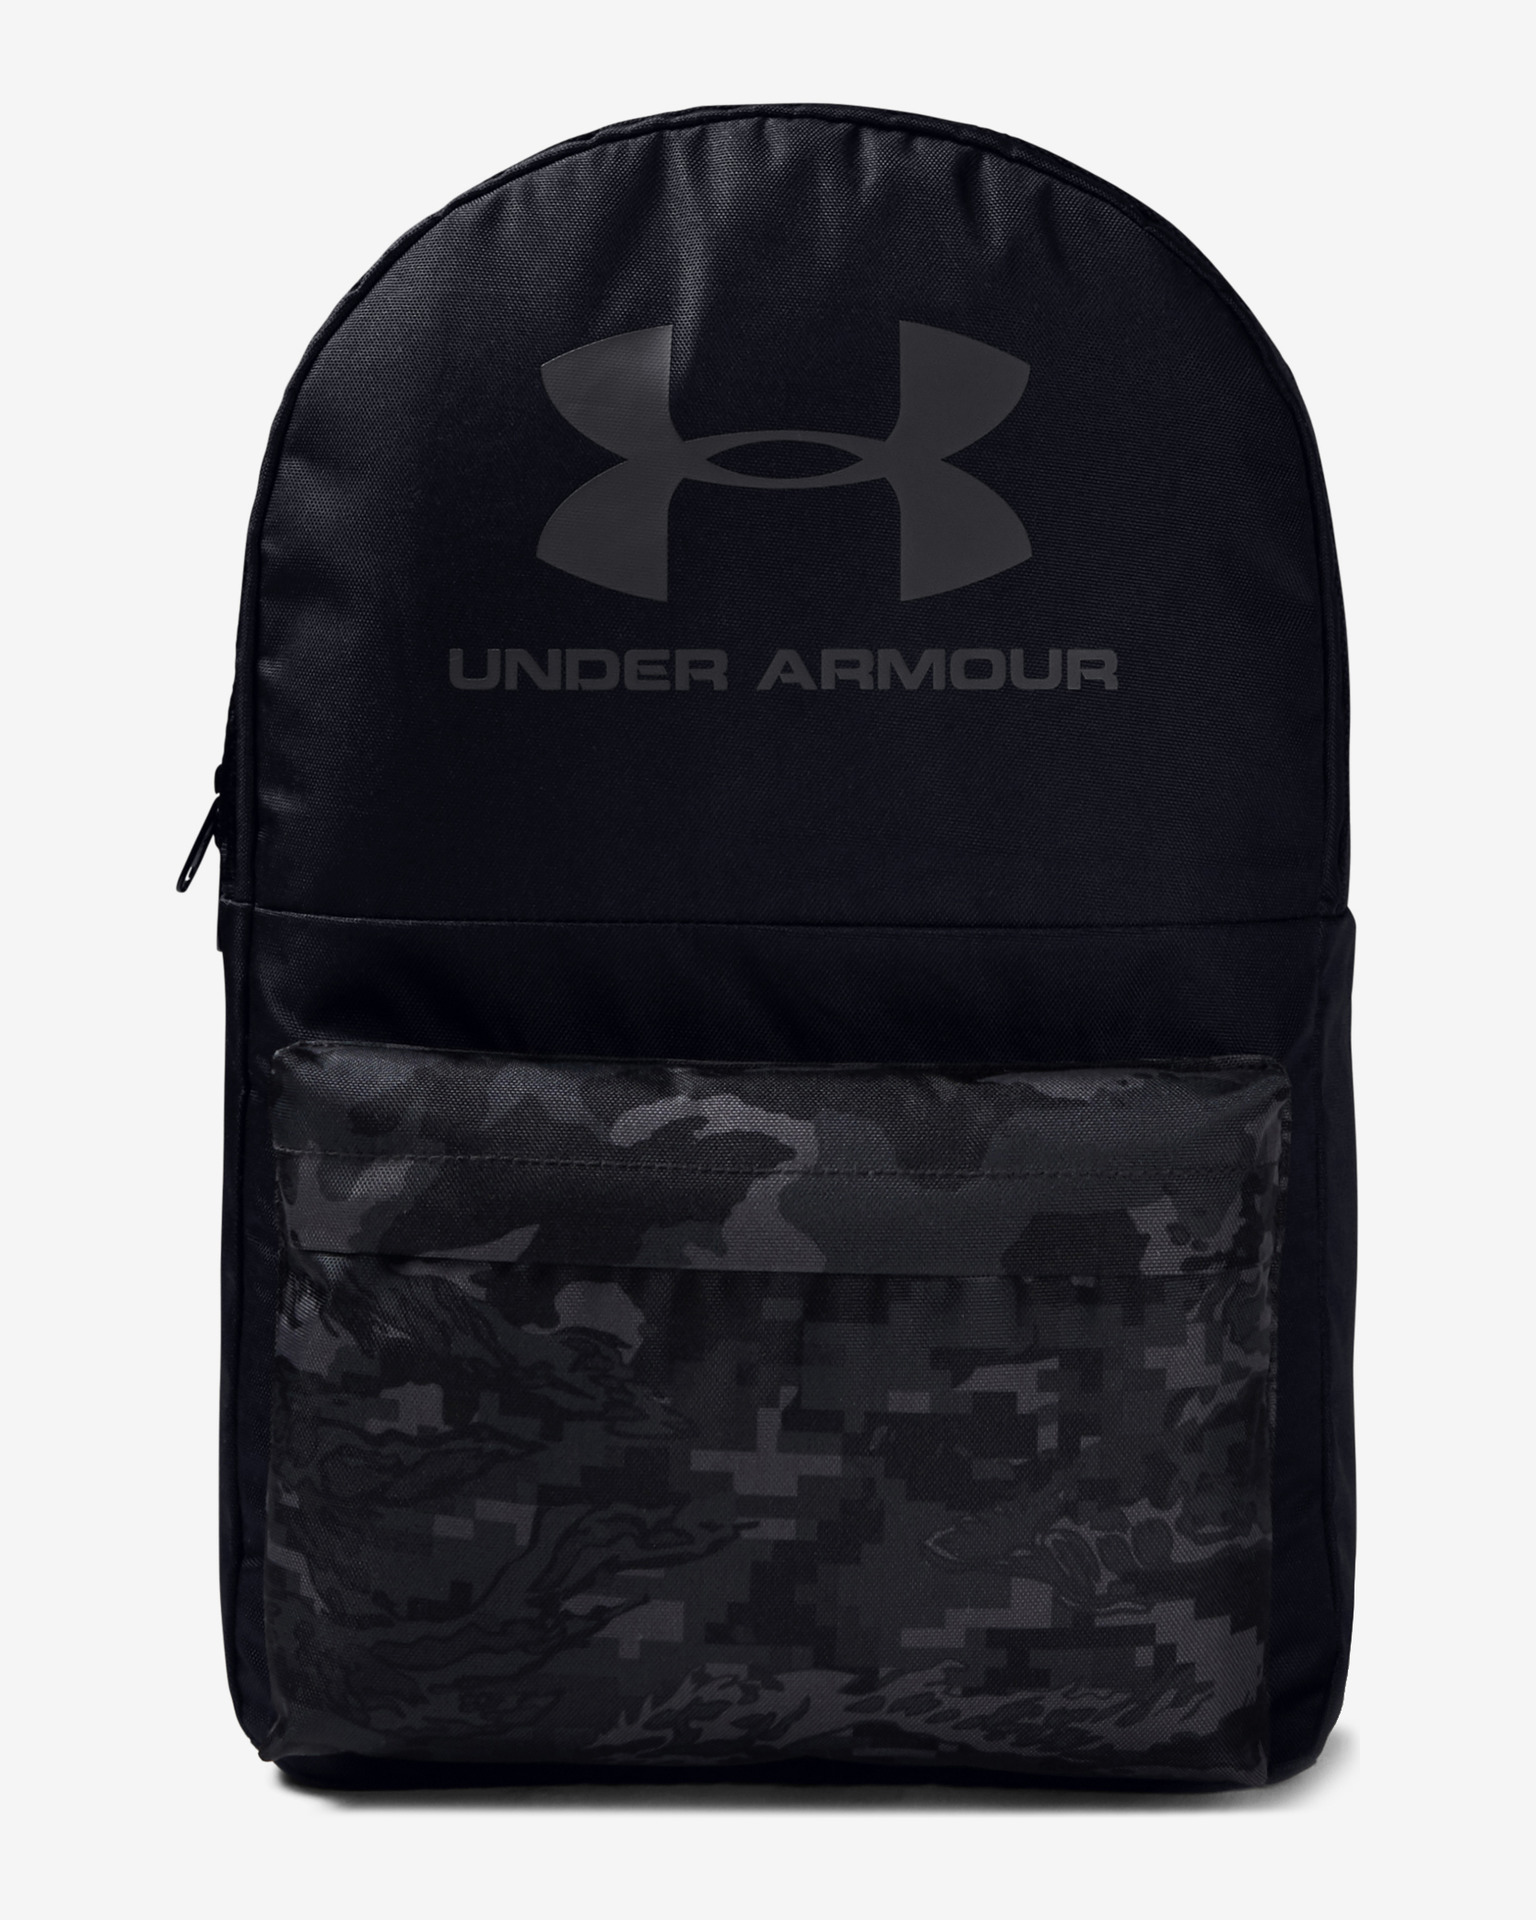 Under Armour Loudon Backpack Black Storm Large Zipped Compartment Laptop Sleeve 